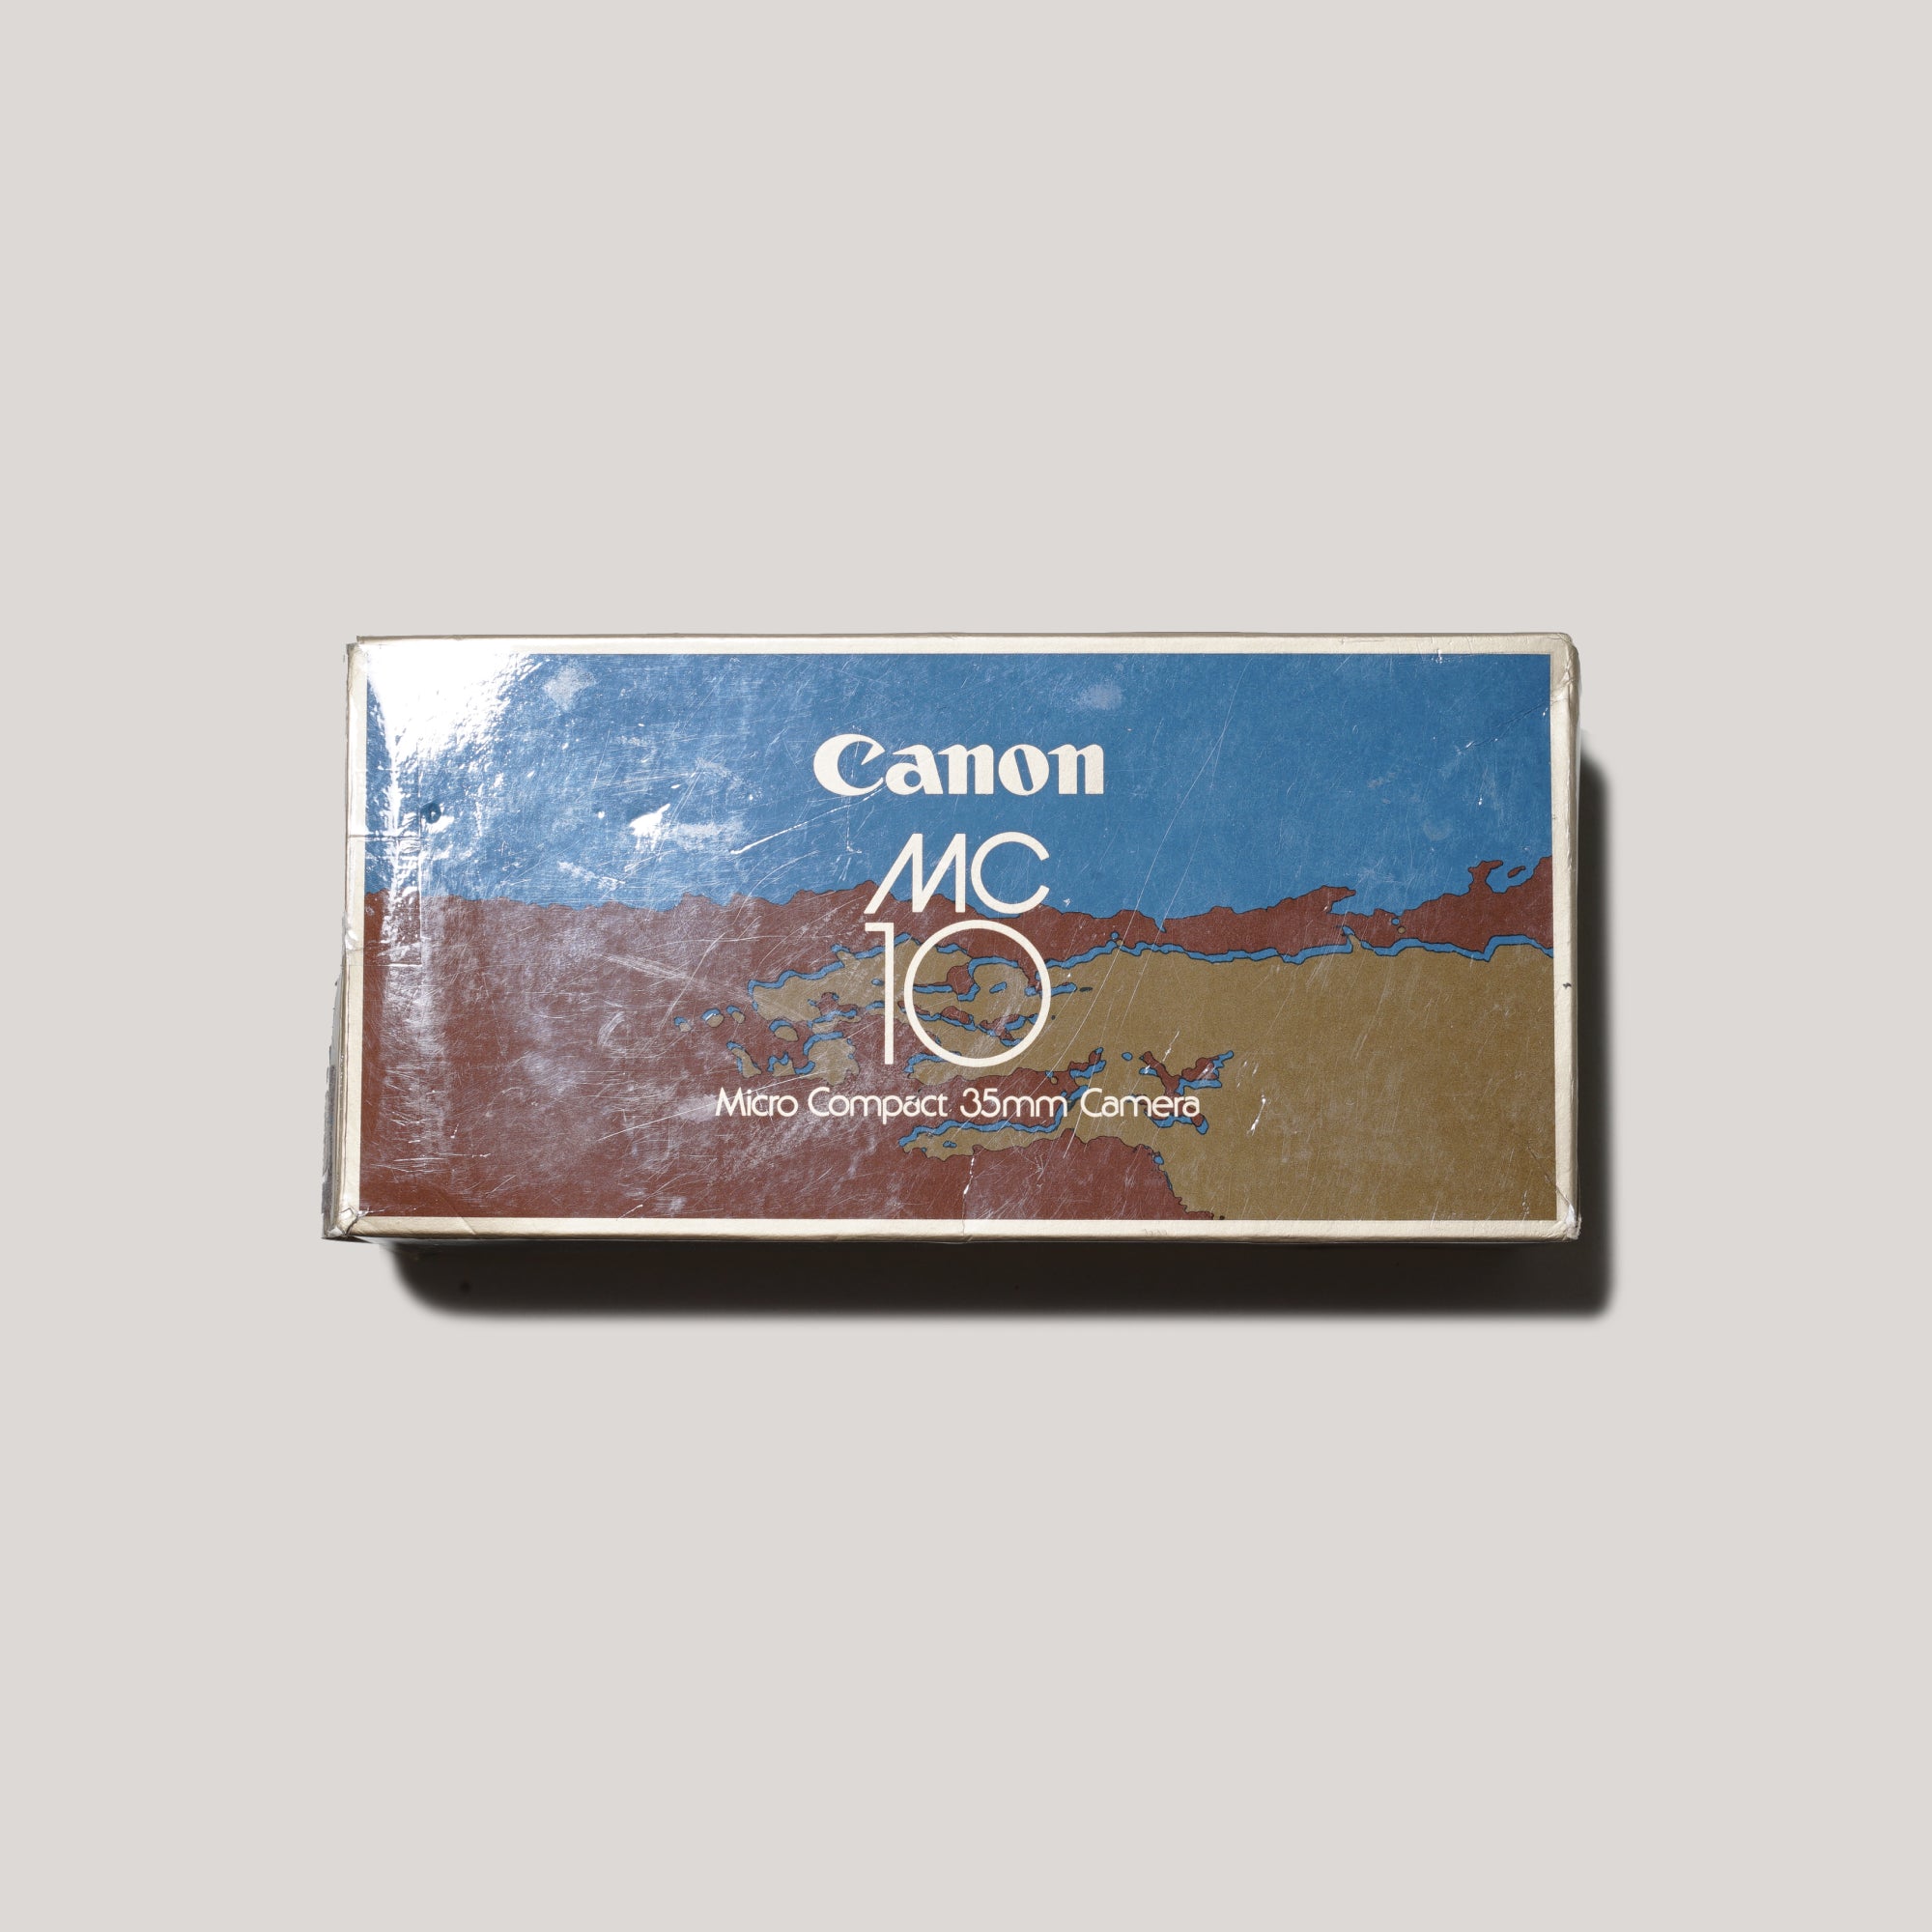 Buy Canon MC 10 now at Analogue Amsterdam